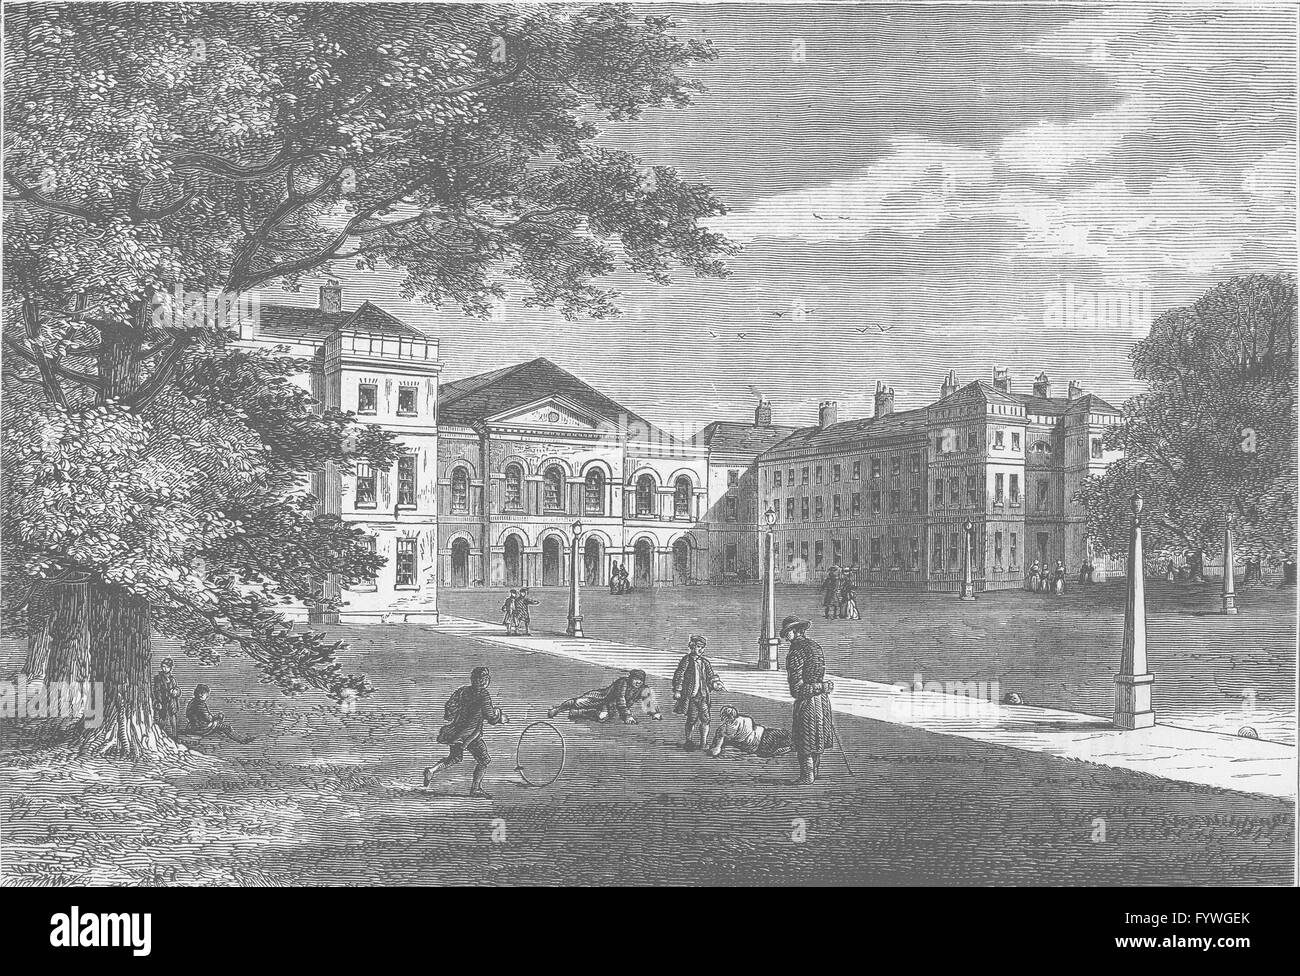 Foundling hospital Black and White Stock Photos & Images - Alamy